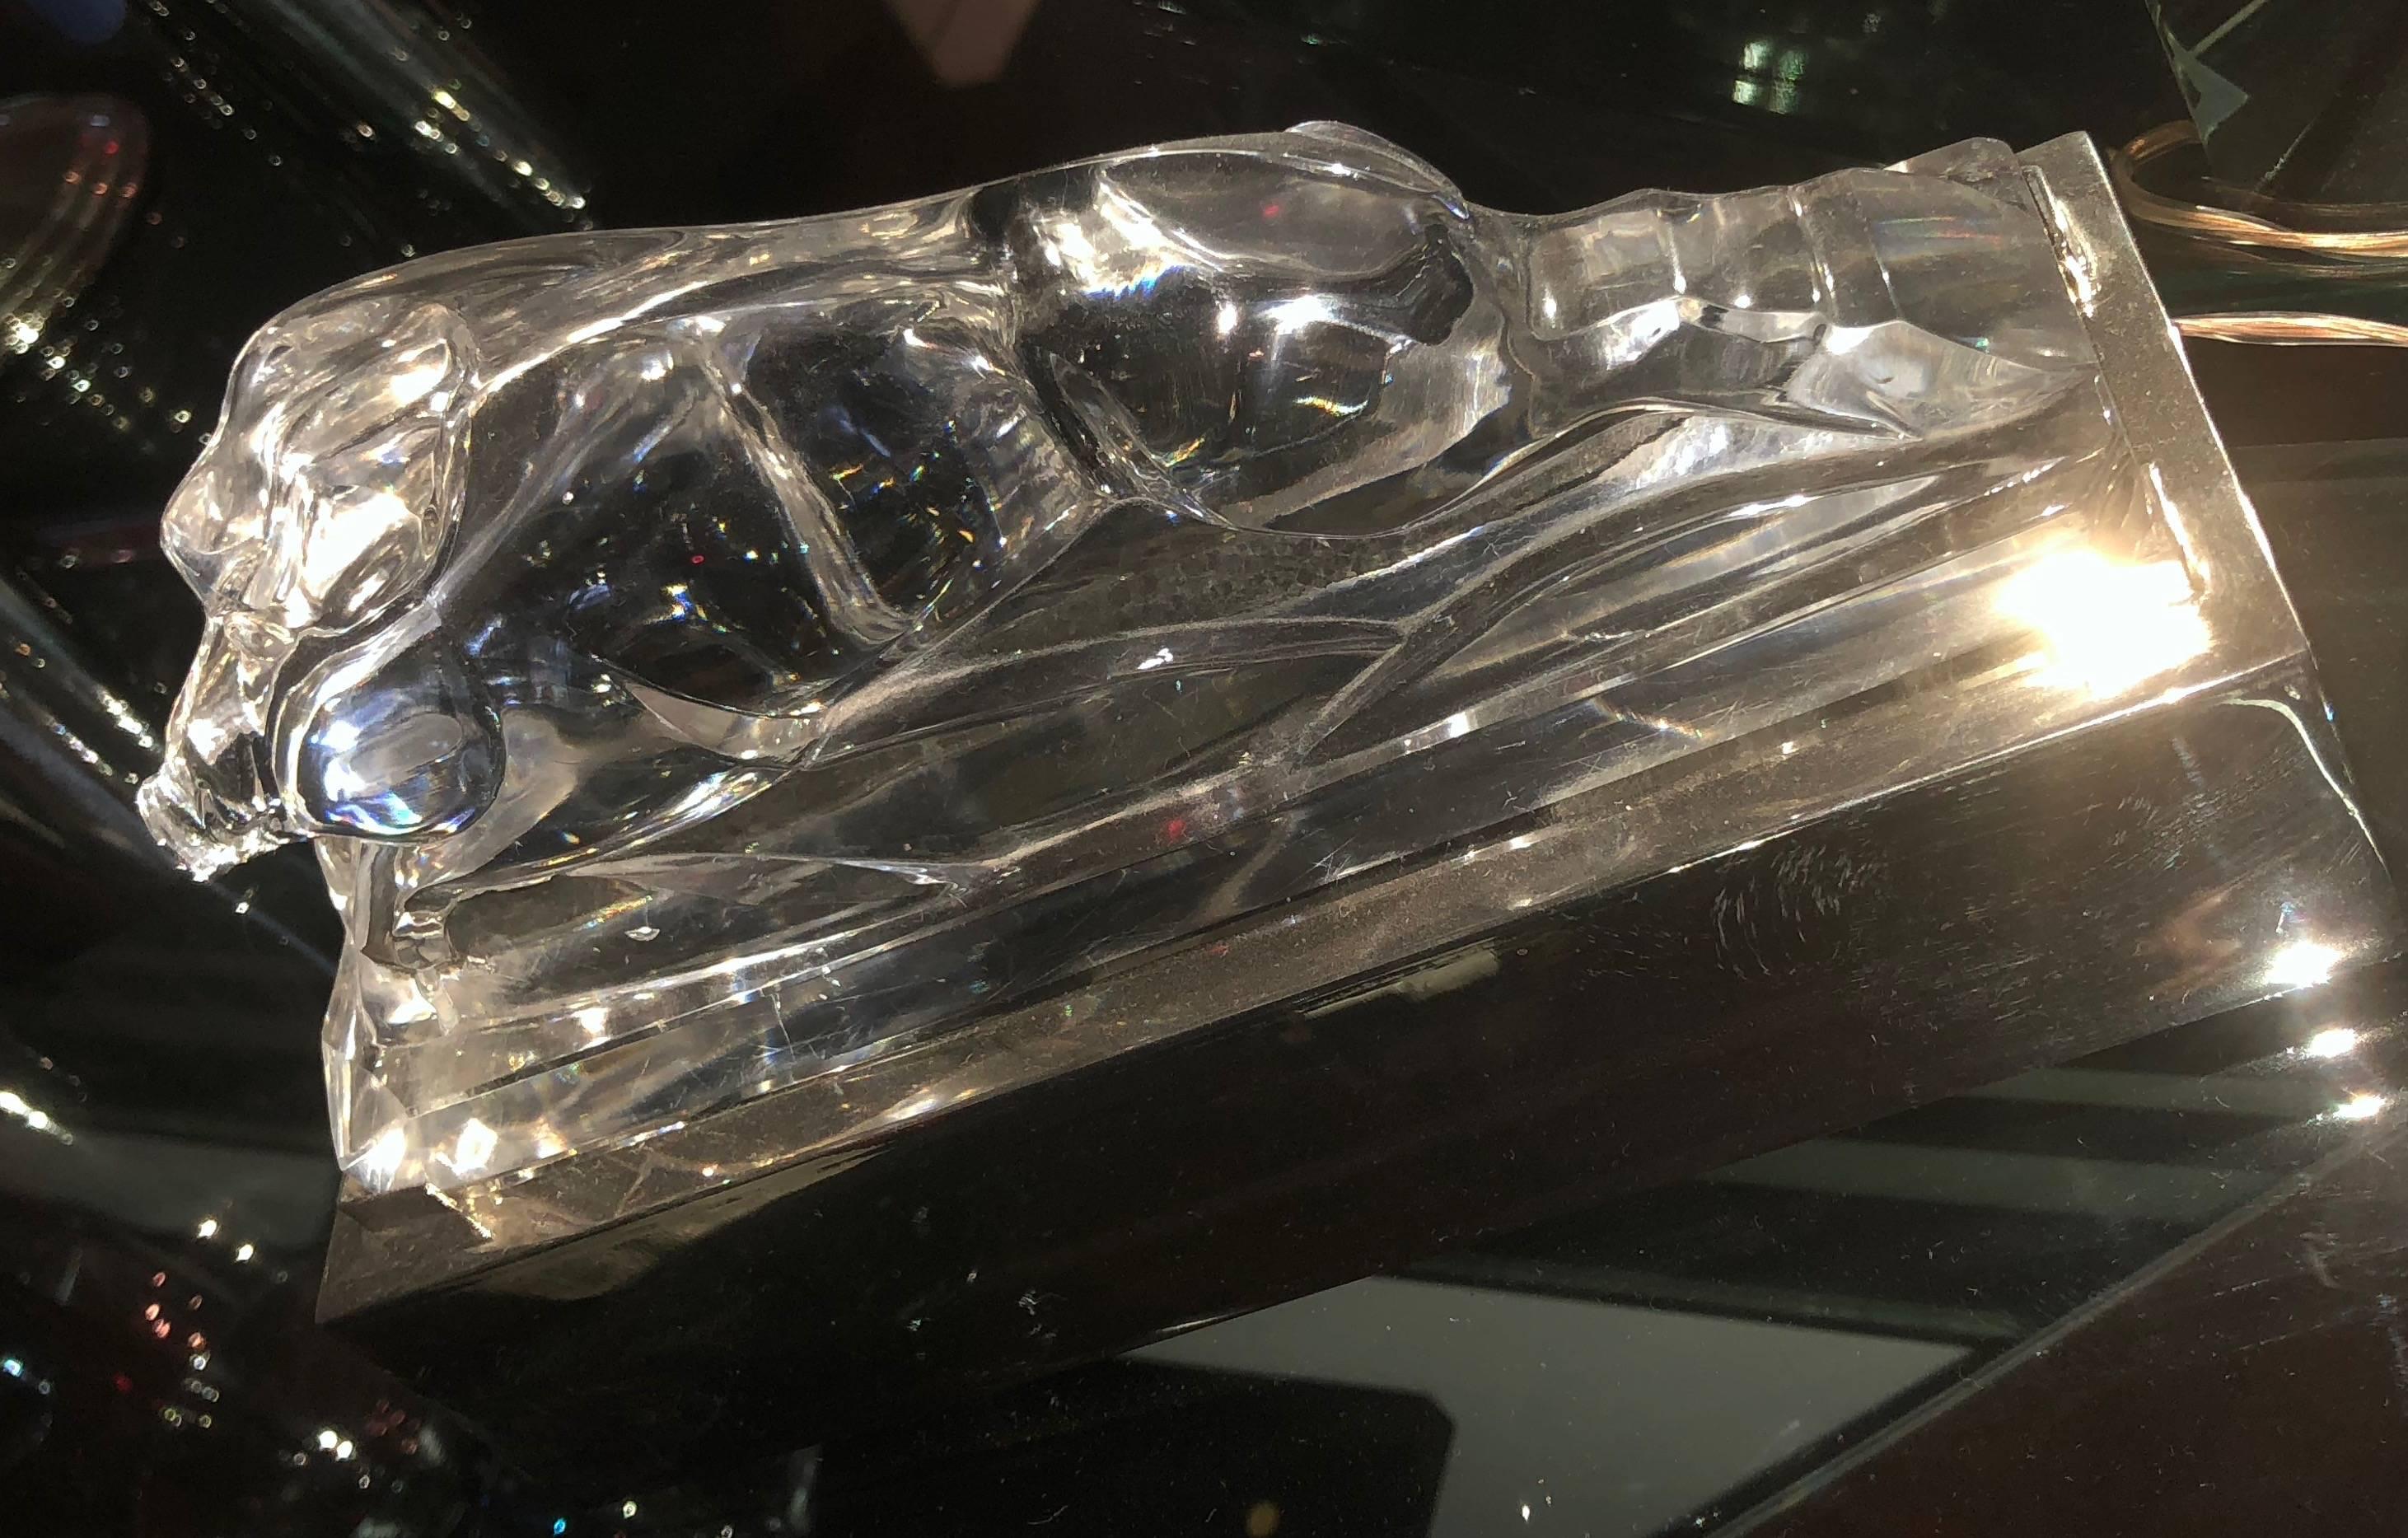 Art Deco Lumiere Desk Light with Swine or Boar in the Style of Baccarat Crystal 4